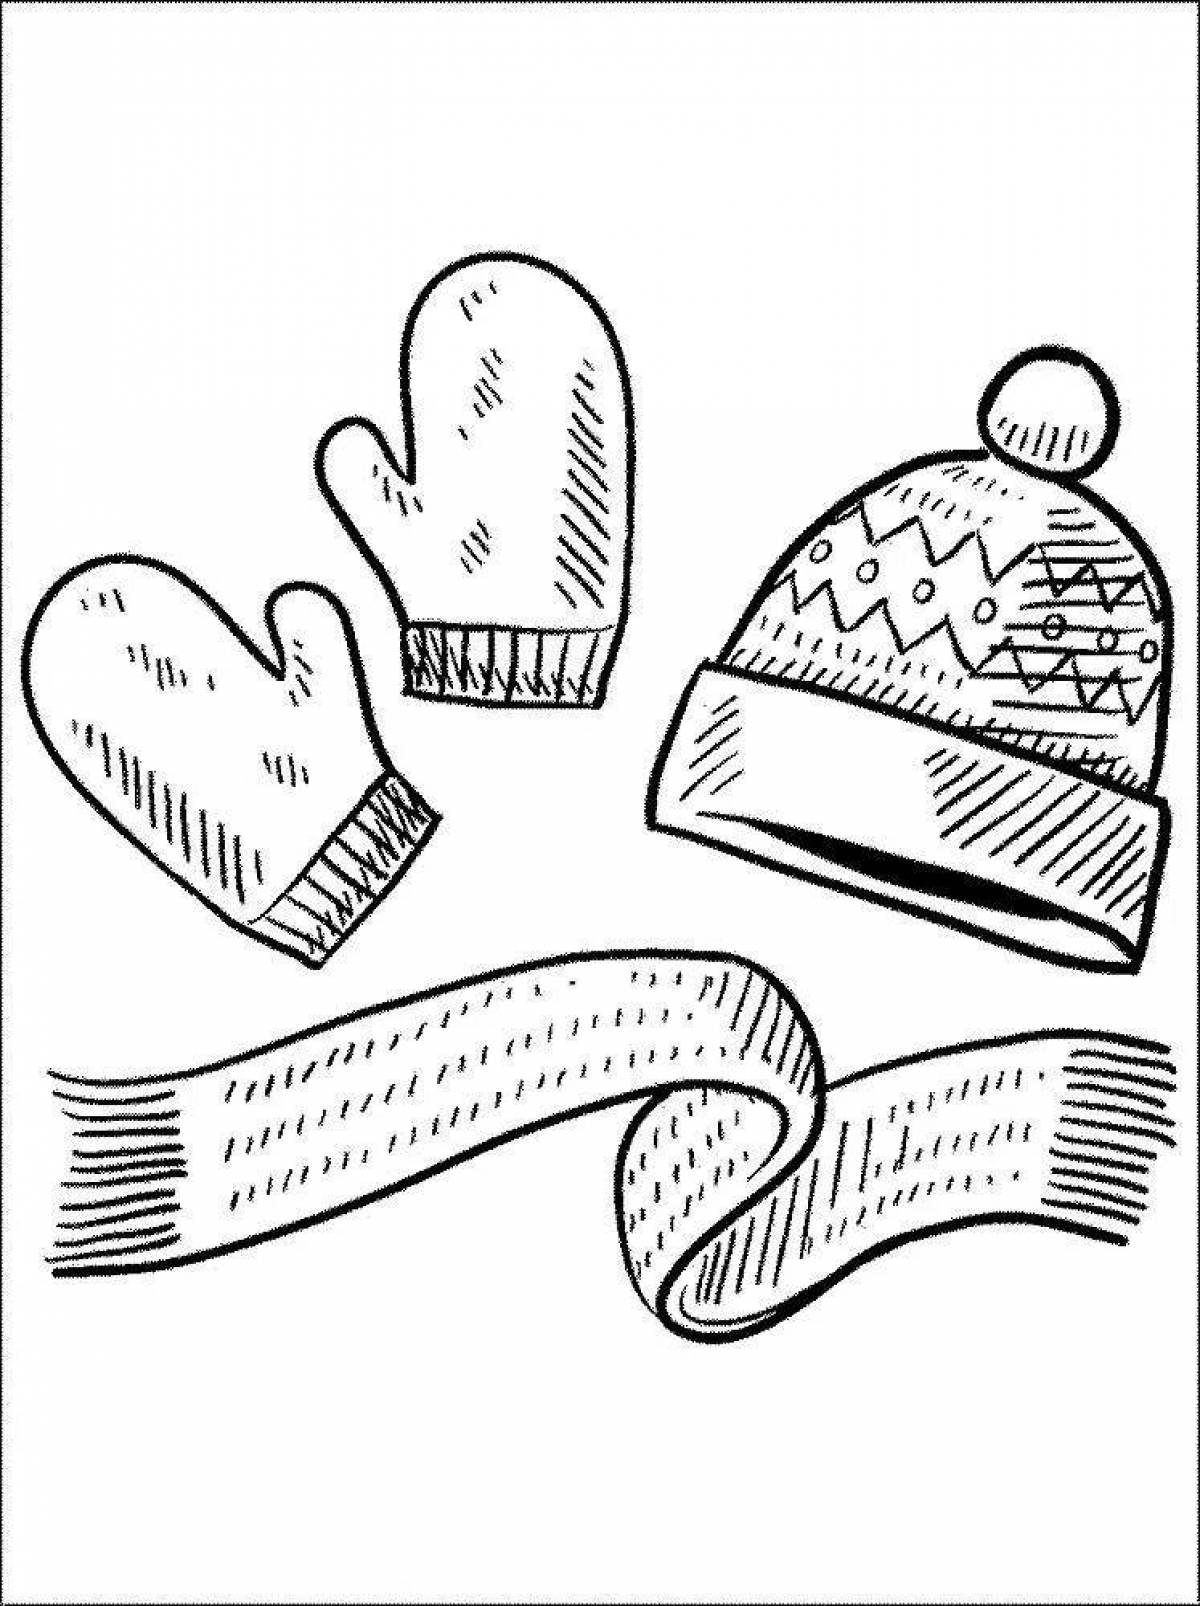 Coloring book shining scarf and hat